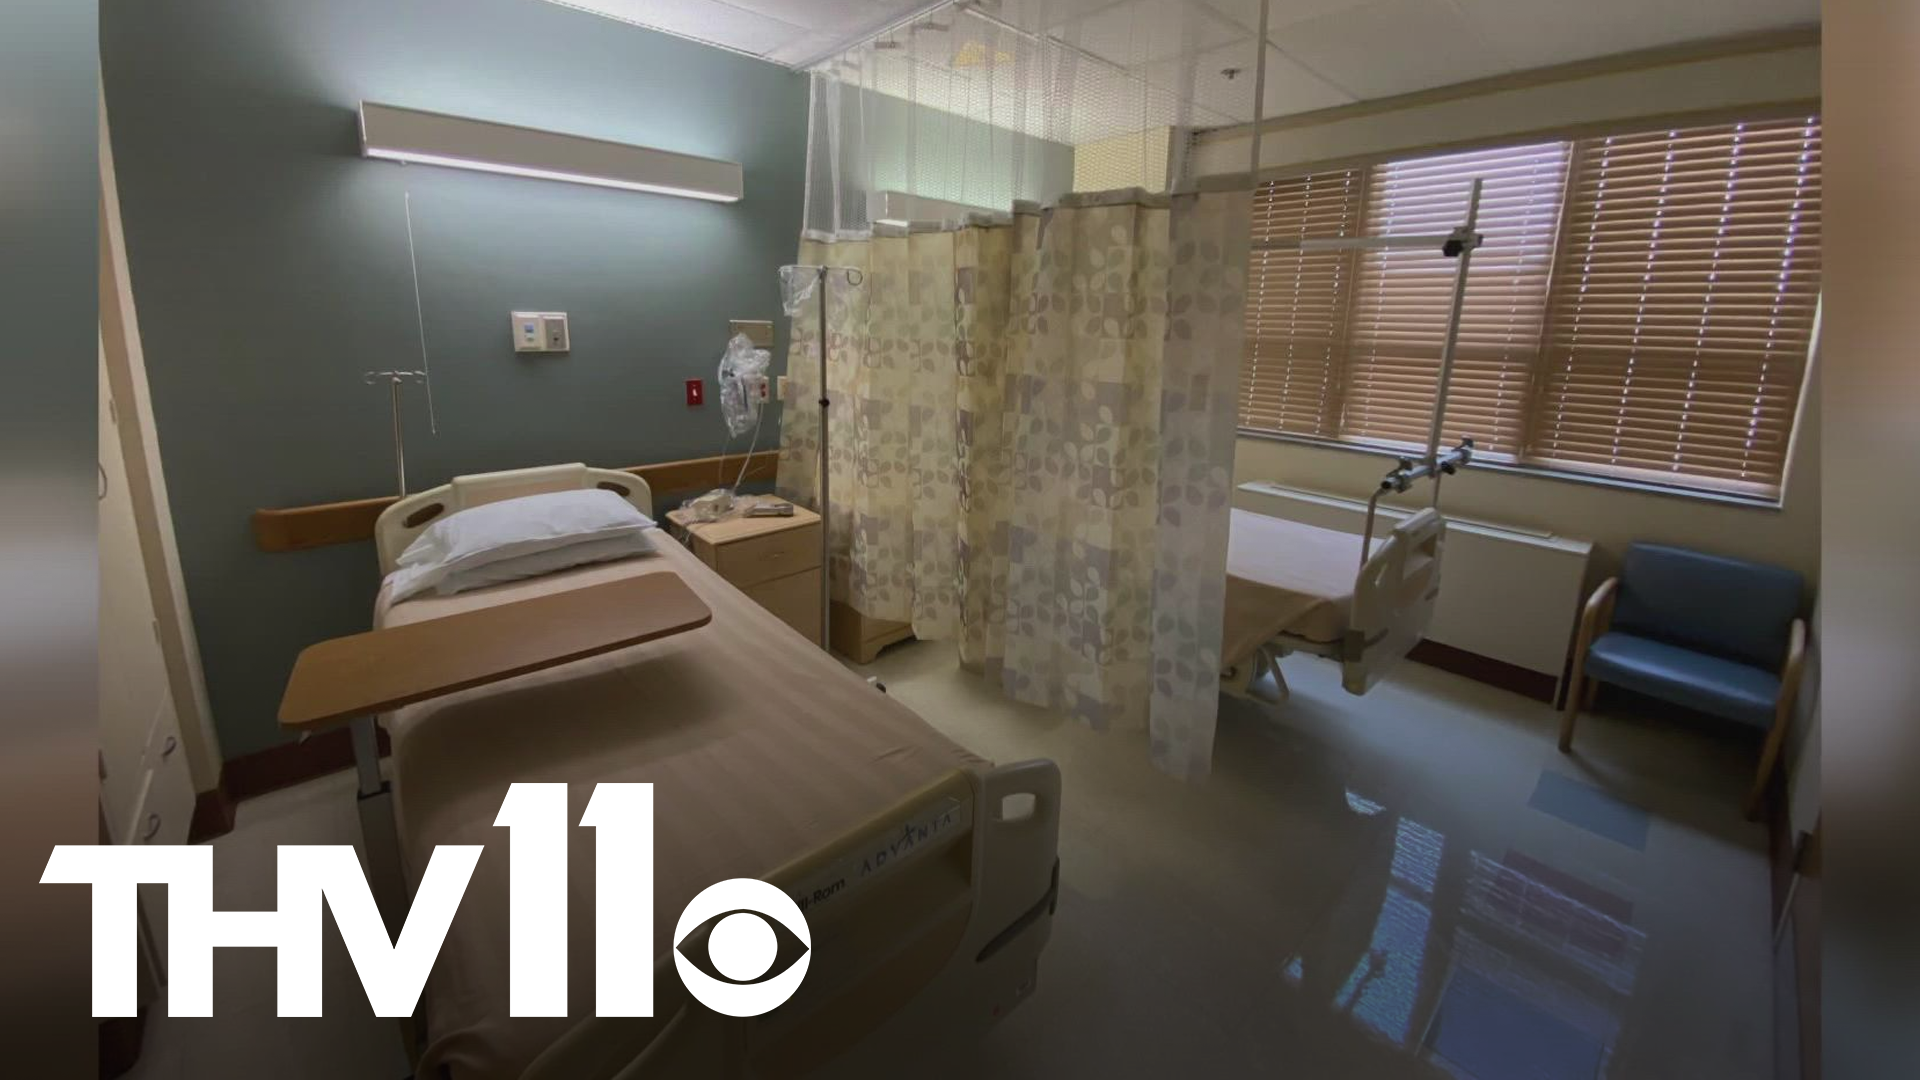 The Baptist Health system is converting more bed space for COVID patients as hospitals continue to be overloaded by virus patients.